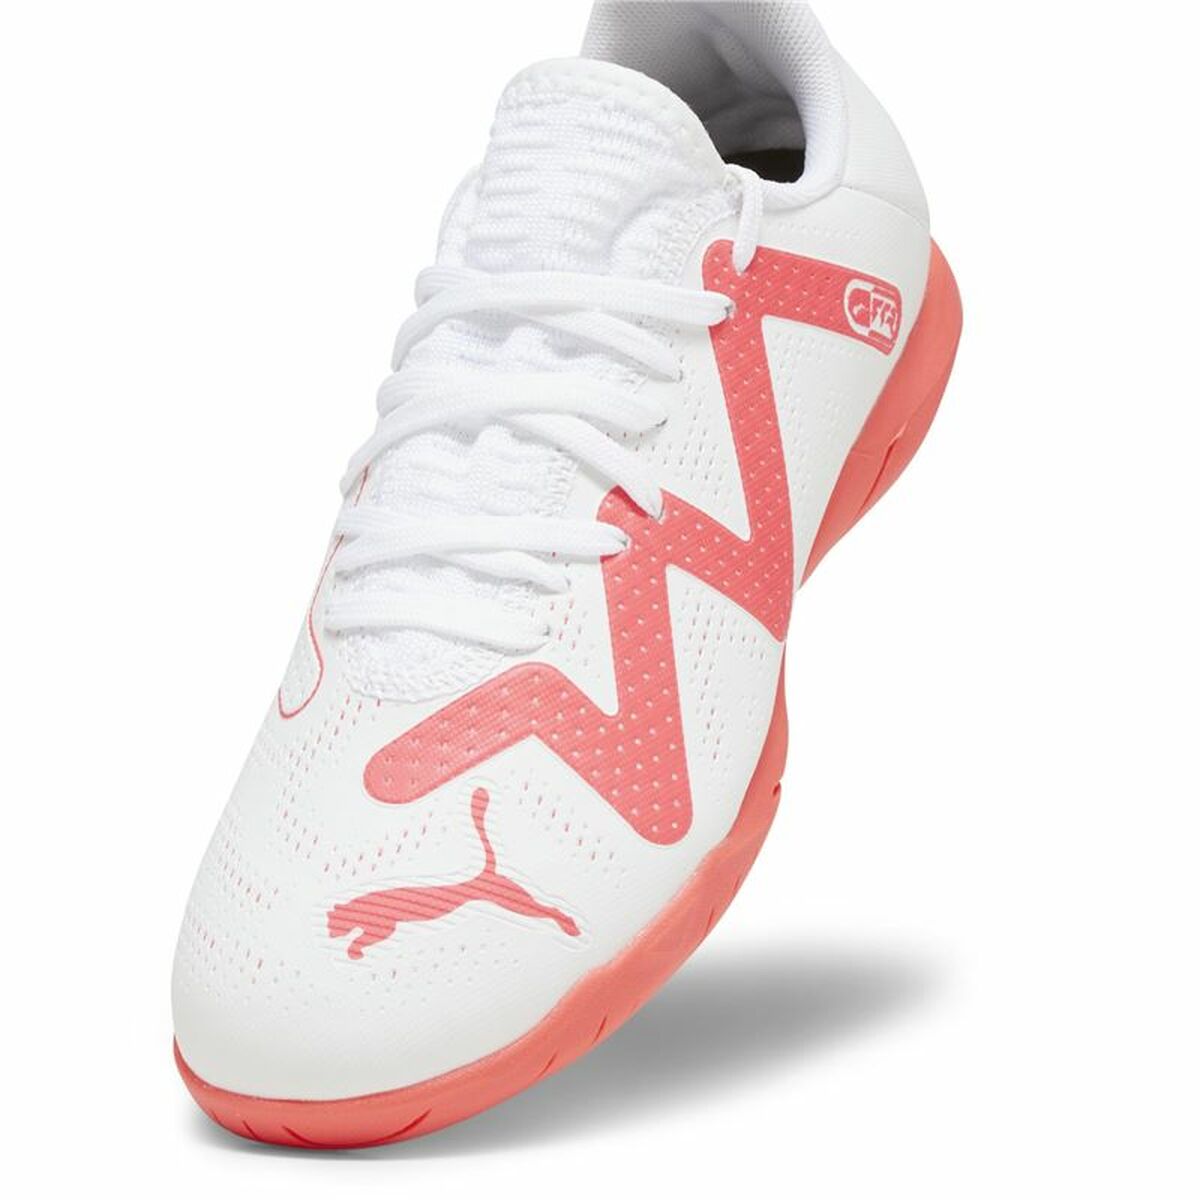 Childrens Football Boots Puma Future Play It White Pink